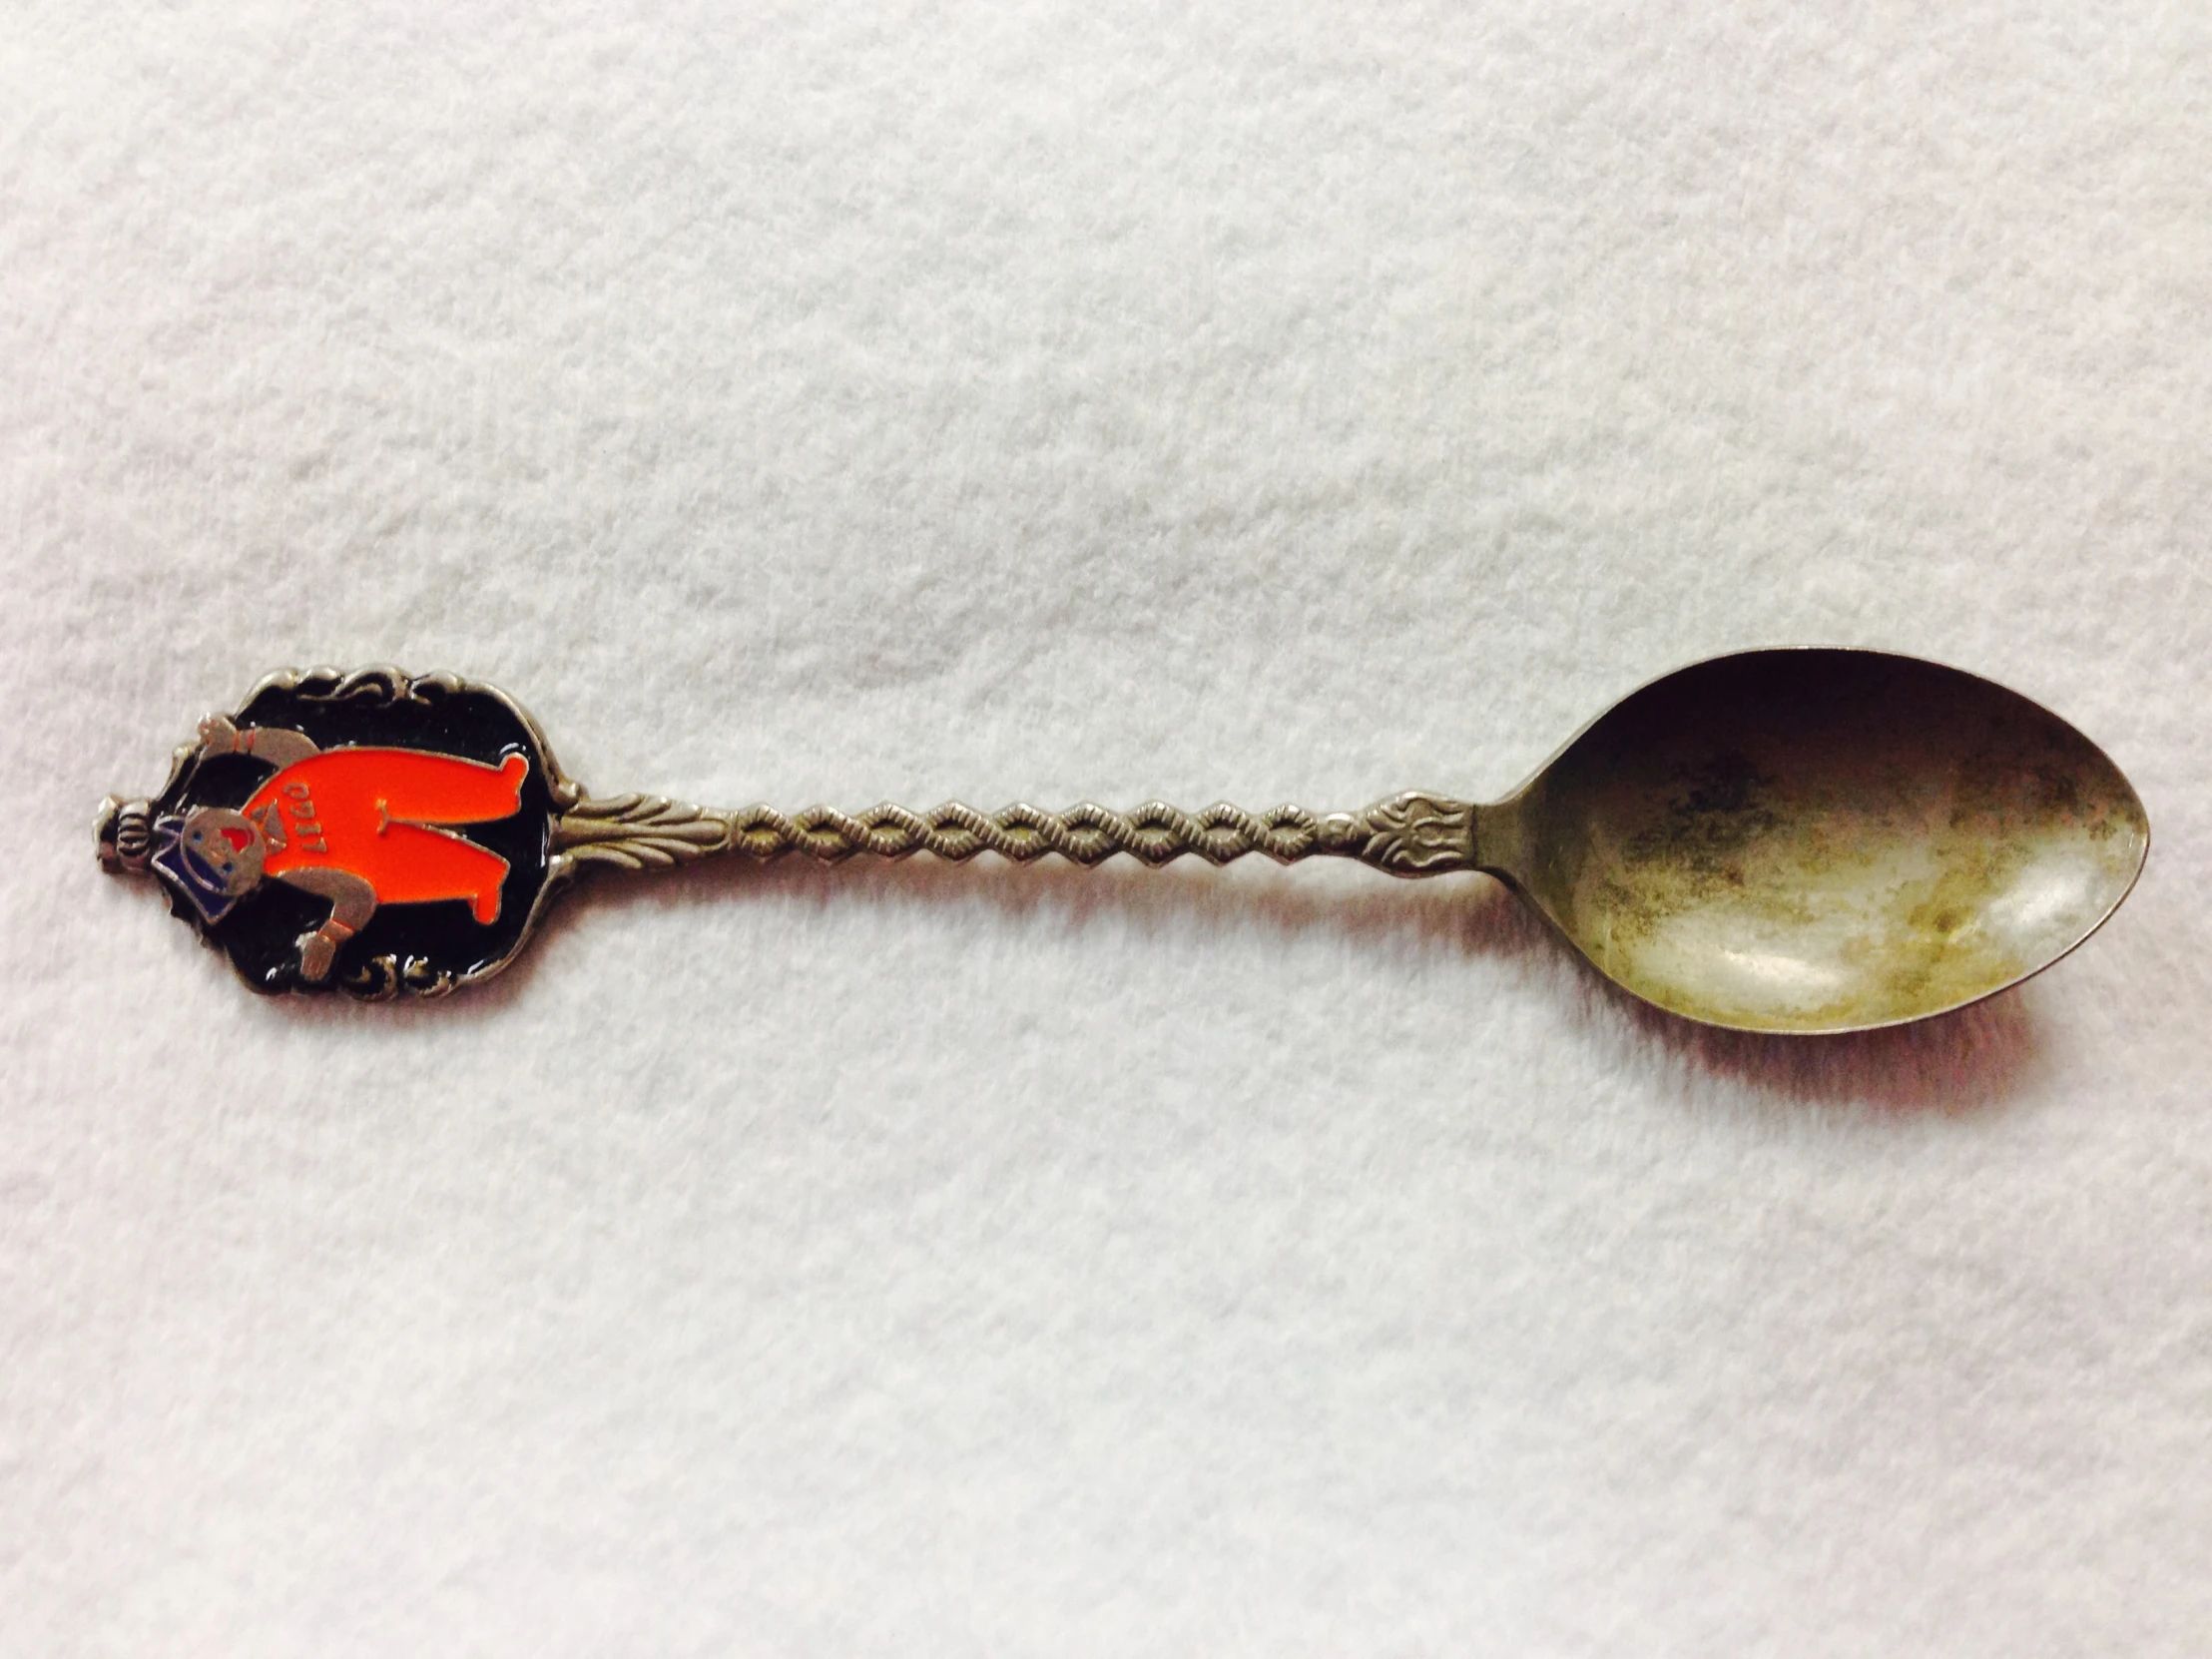 a spoon and a spoon shaped brooche with an orange person on it